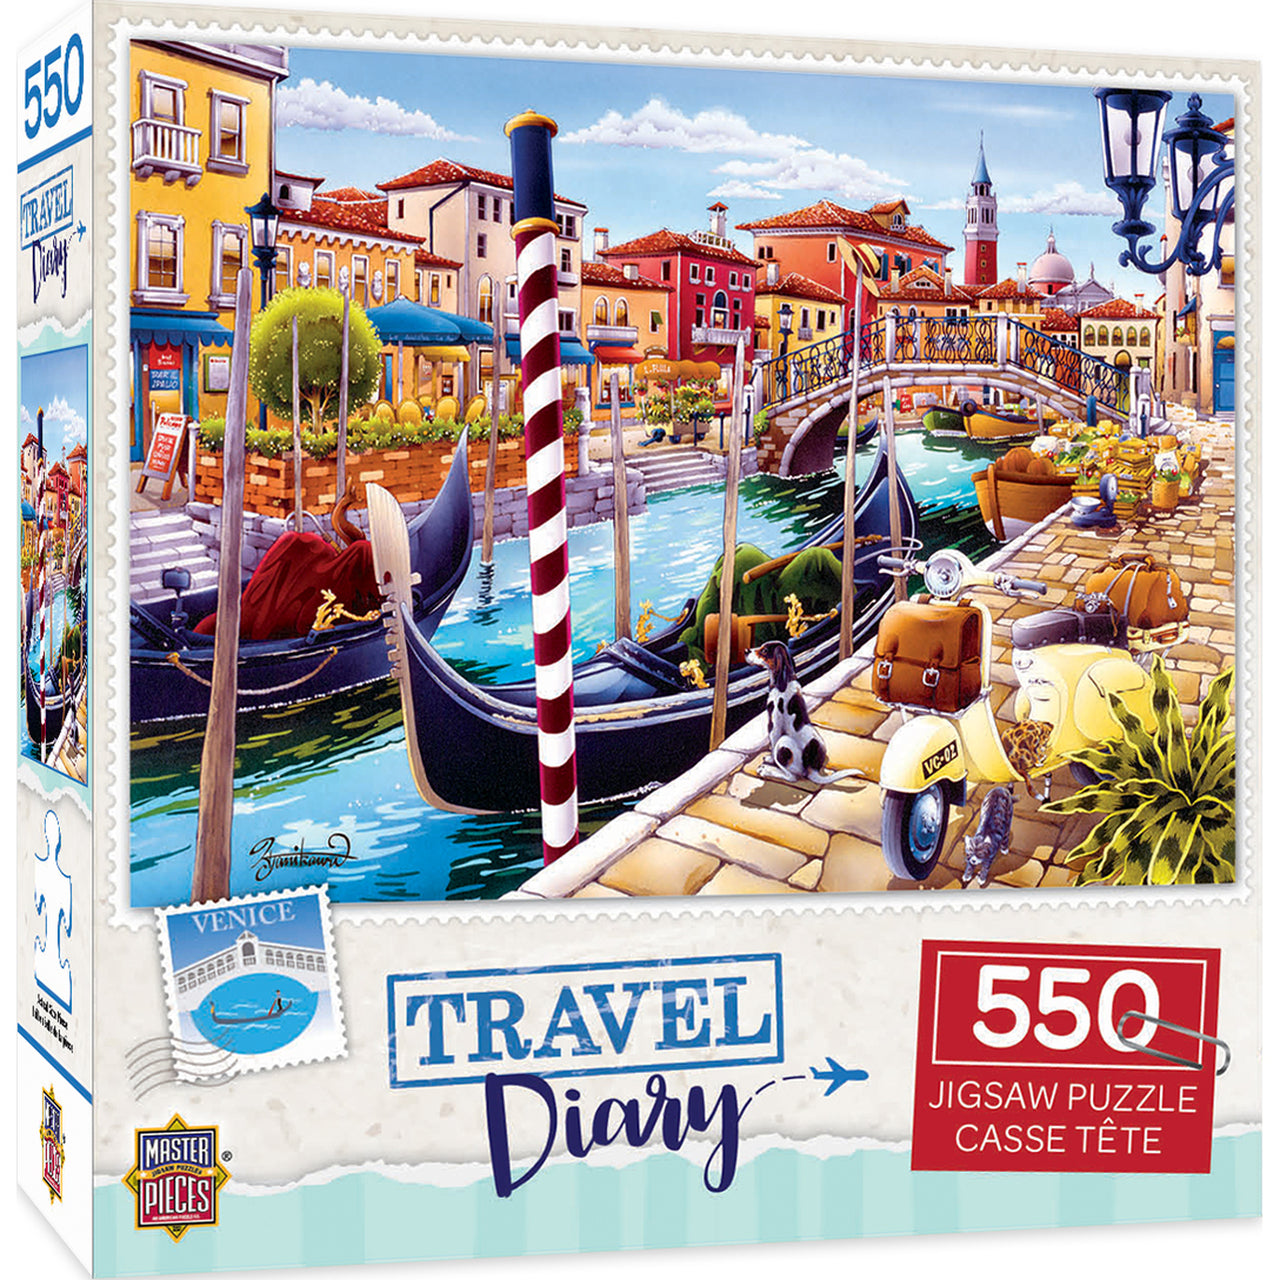 Travel Diary Venice - 550 Piece Jigsaw Puzzle by Masterpieces